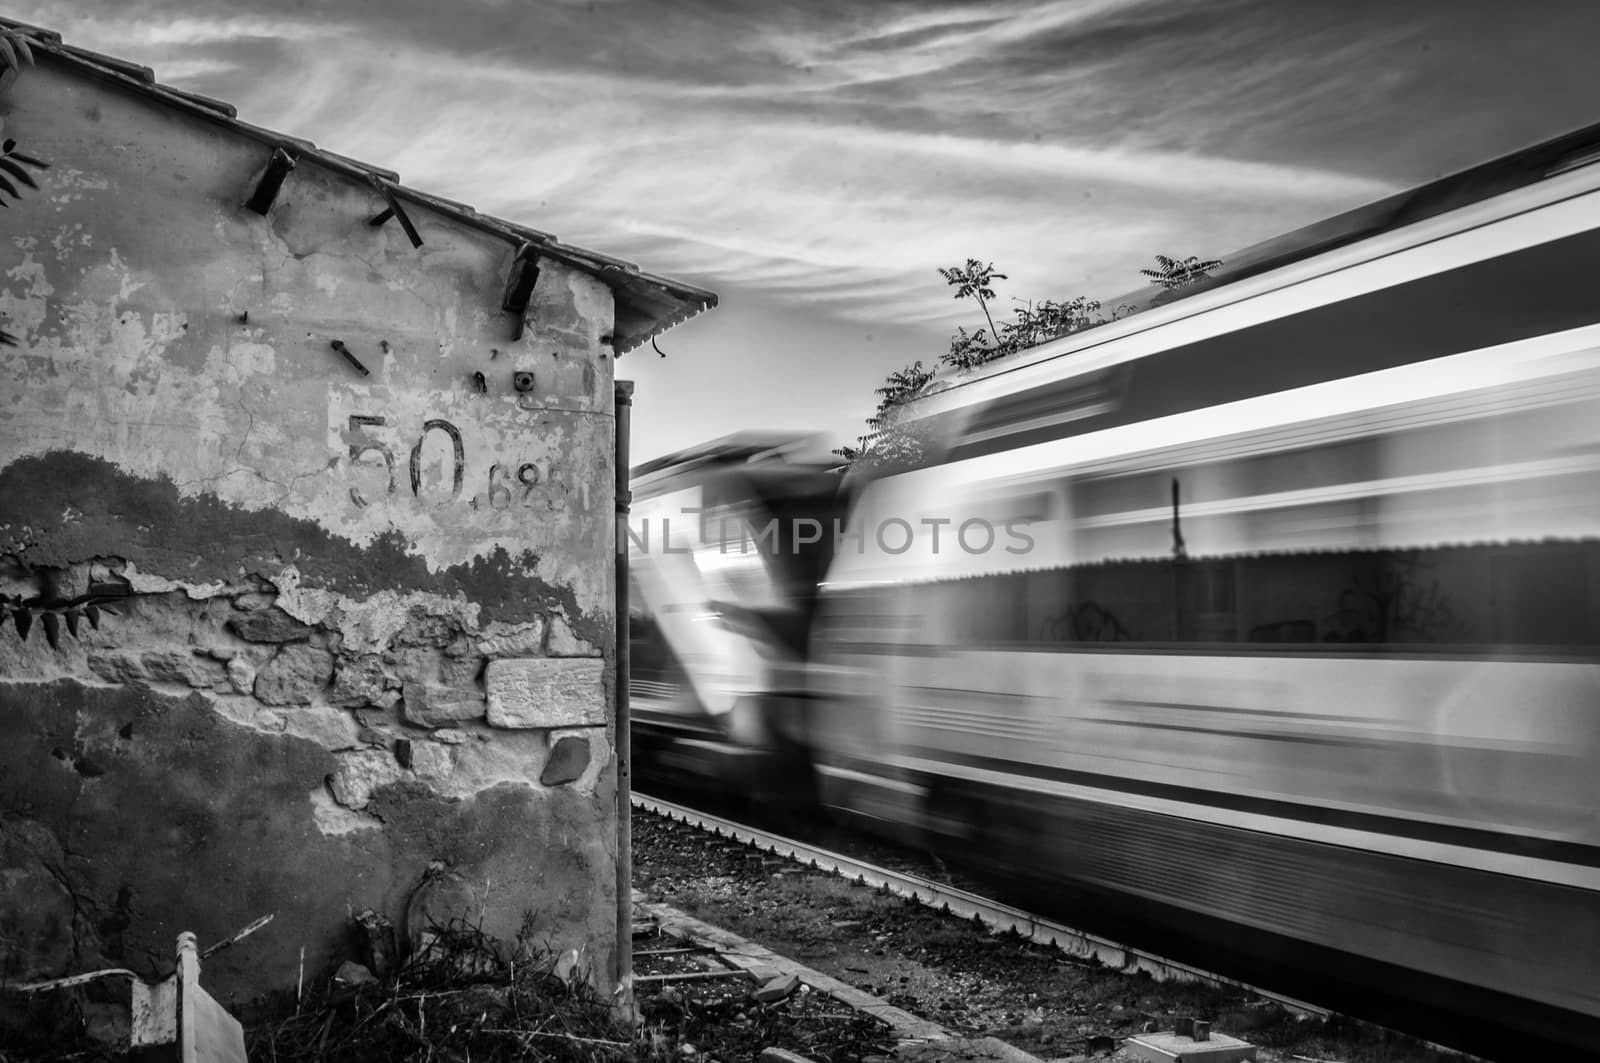 Train running near an abandoned rural rail station in black and white